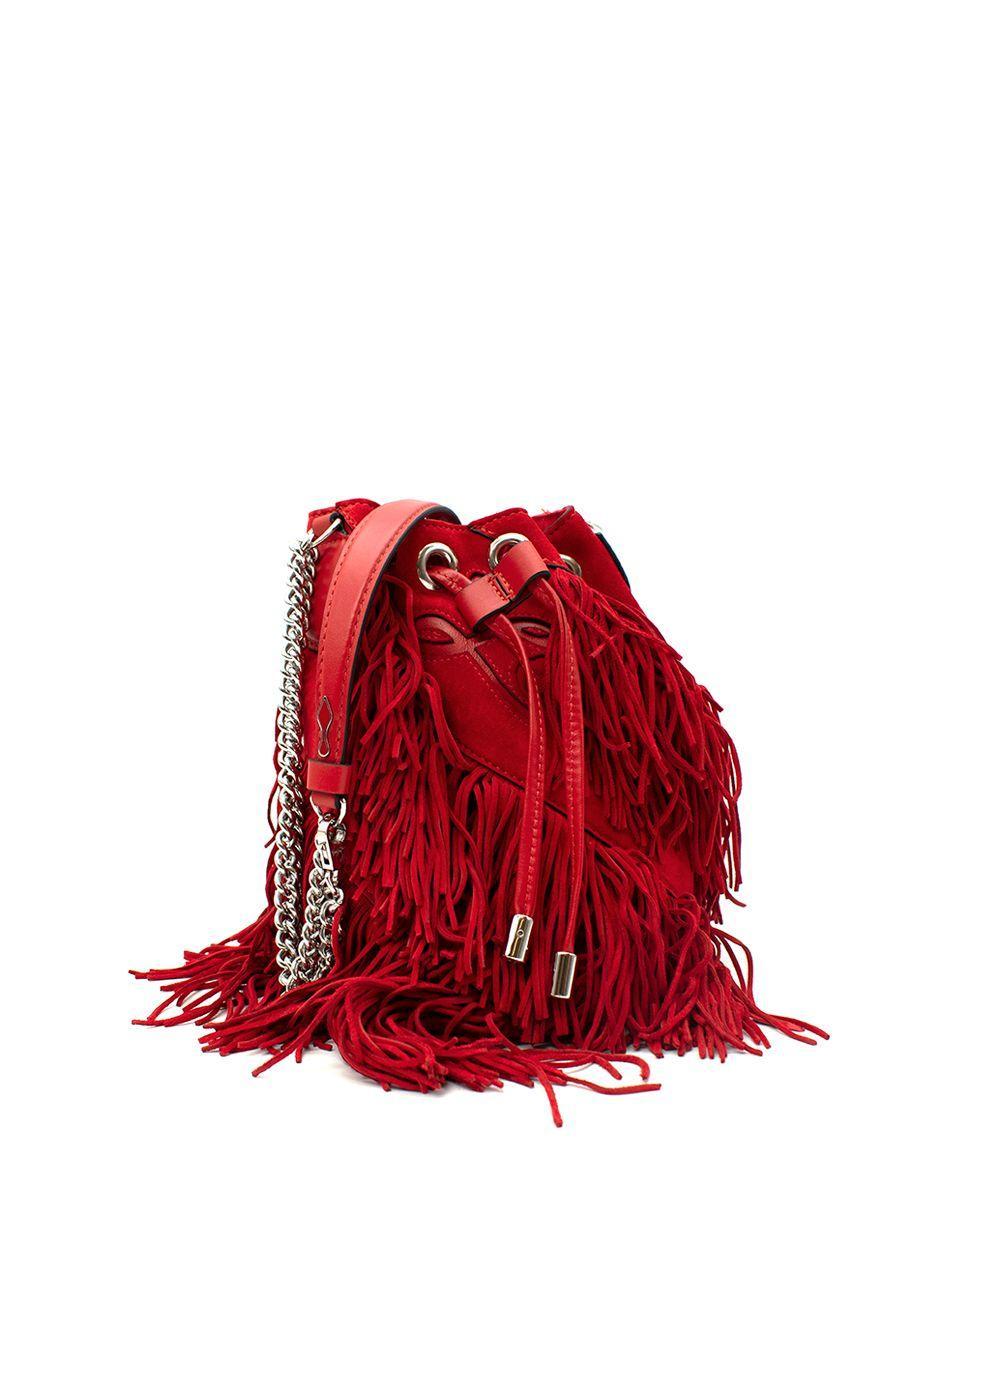 Christian Louboutin Red Suede Marie Jane Fringed Bucket Bag

- Playful spirals of fringe that frame a laser-cut logo
- Detachable silver-tone metal chain shoulder strap
- Single interior compartment
- Red cotton-twill lining

Materials
100%